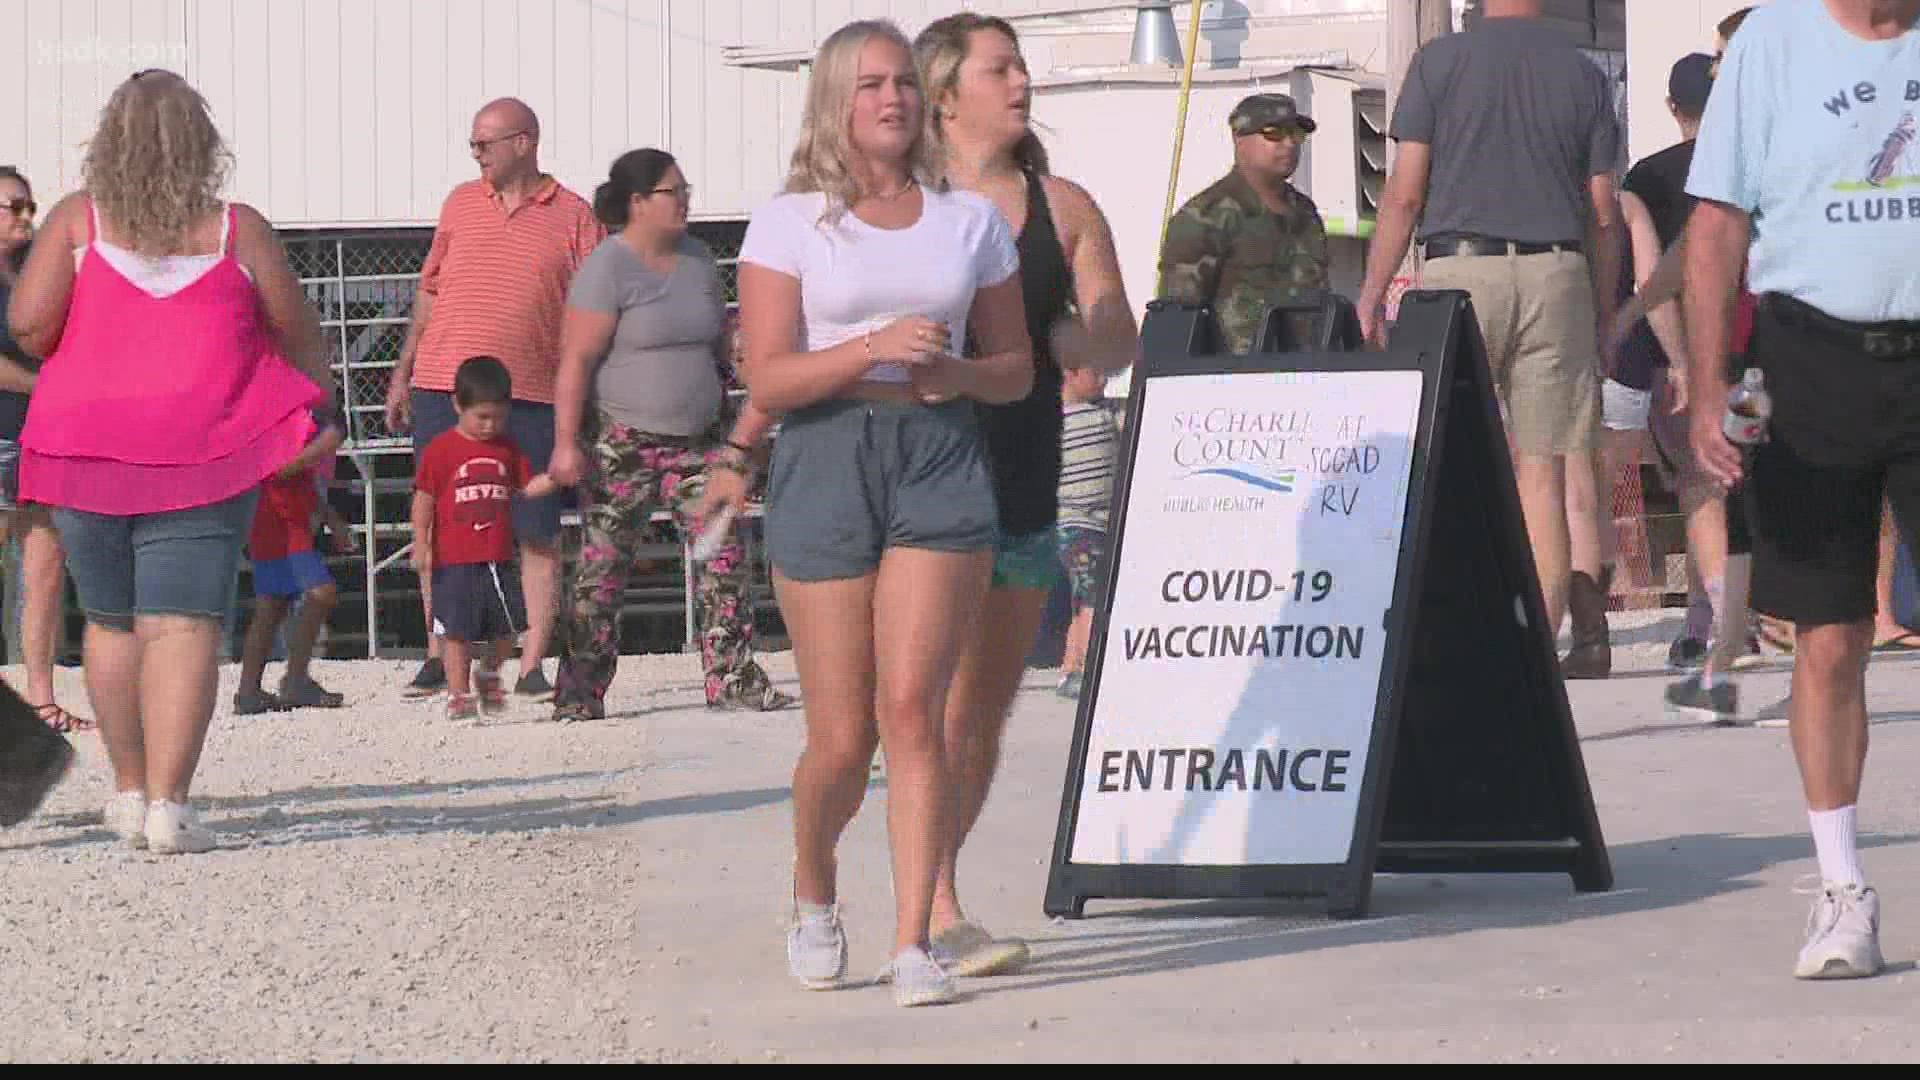 After spending two days at the fair, their COVID-awareness crews didn't vaccinate a single person.